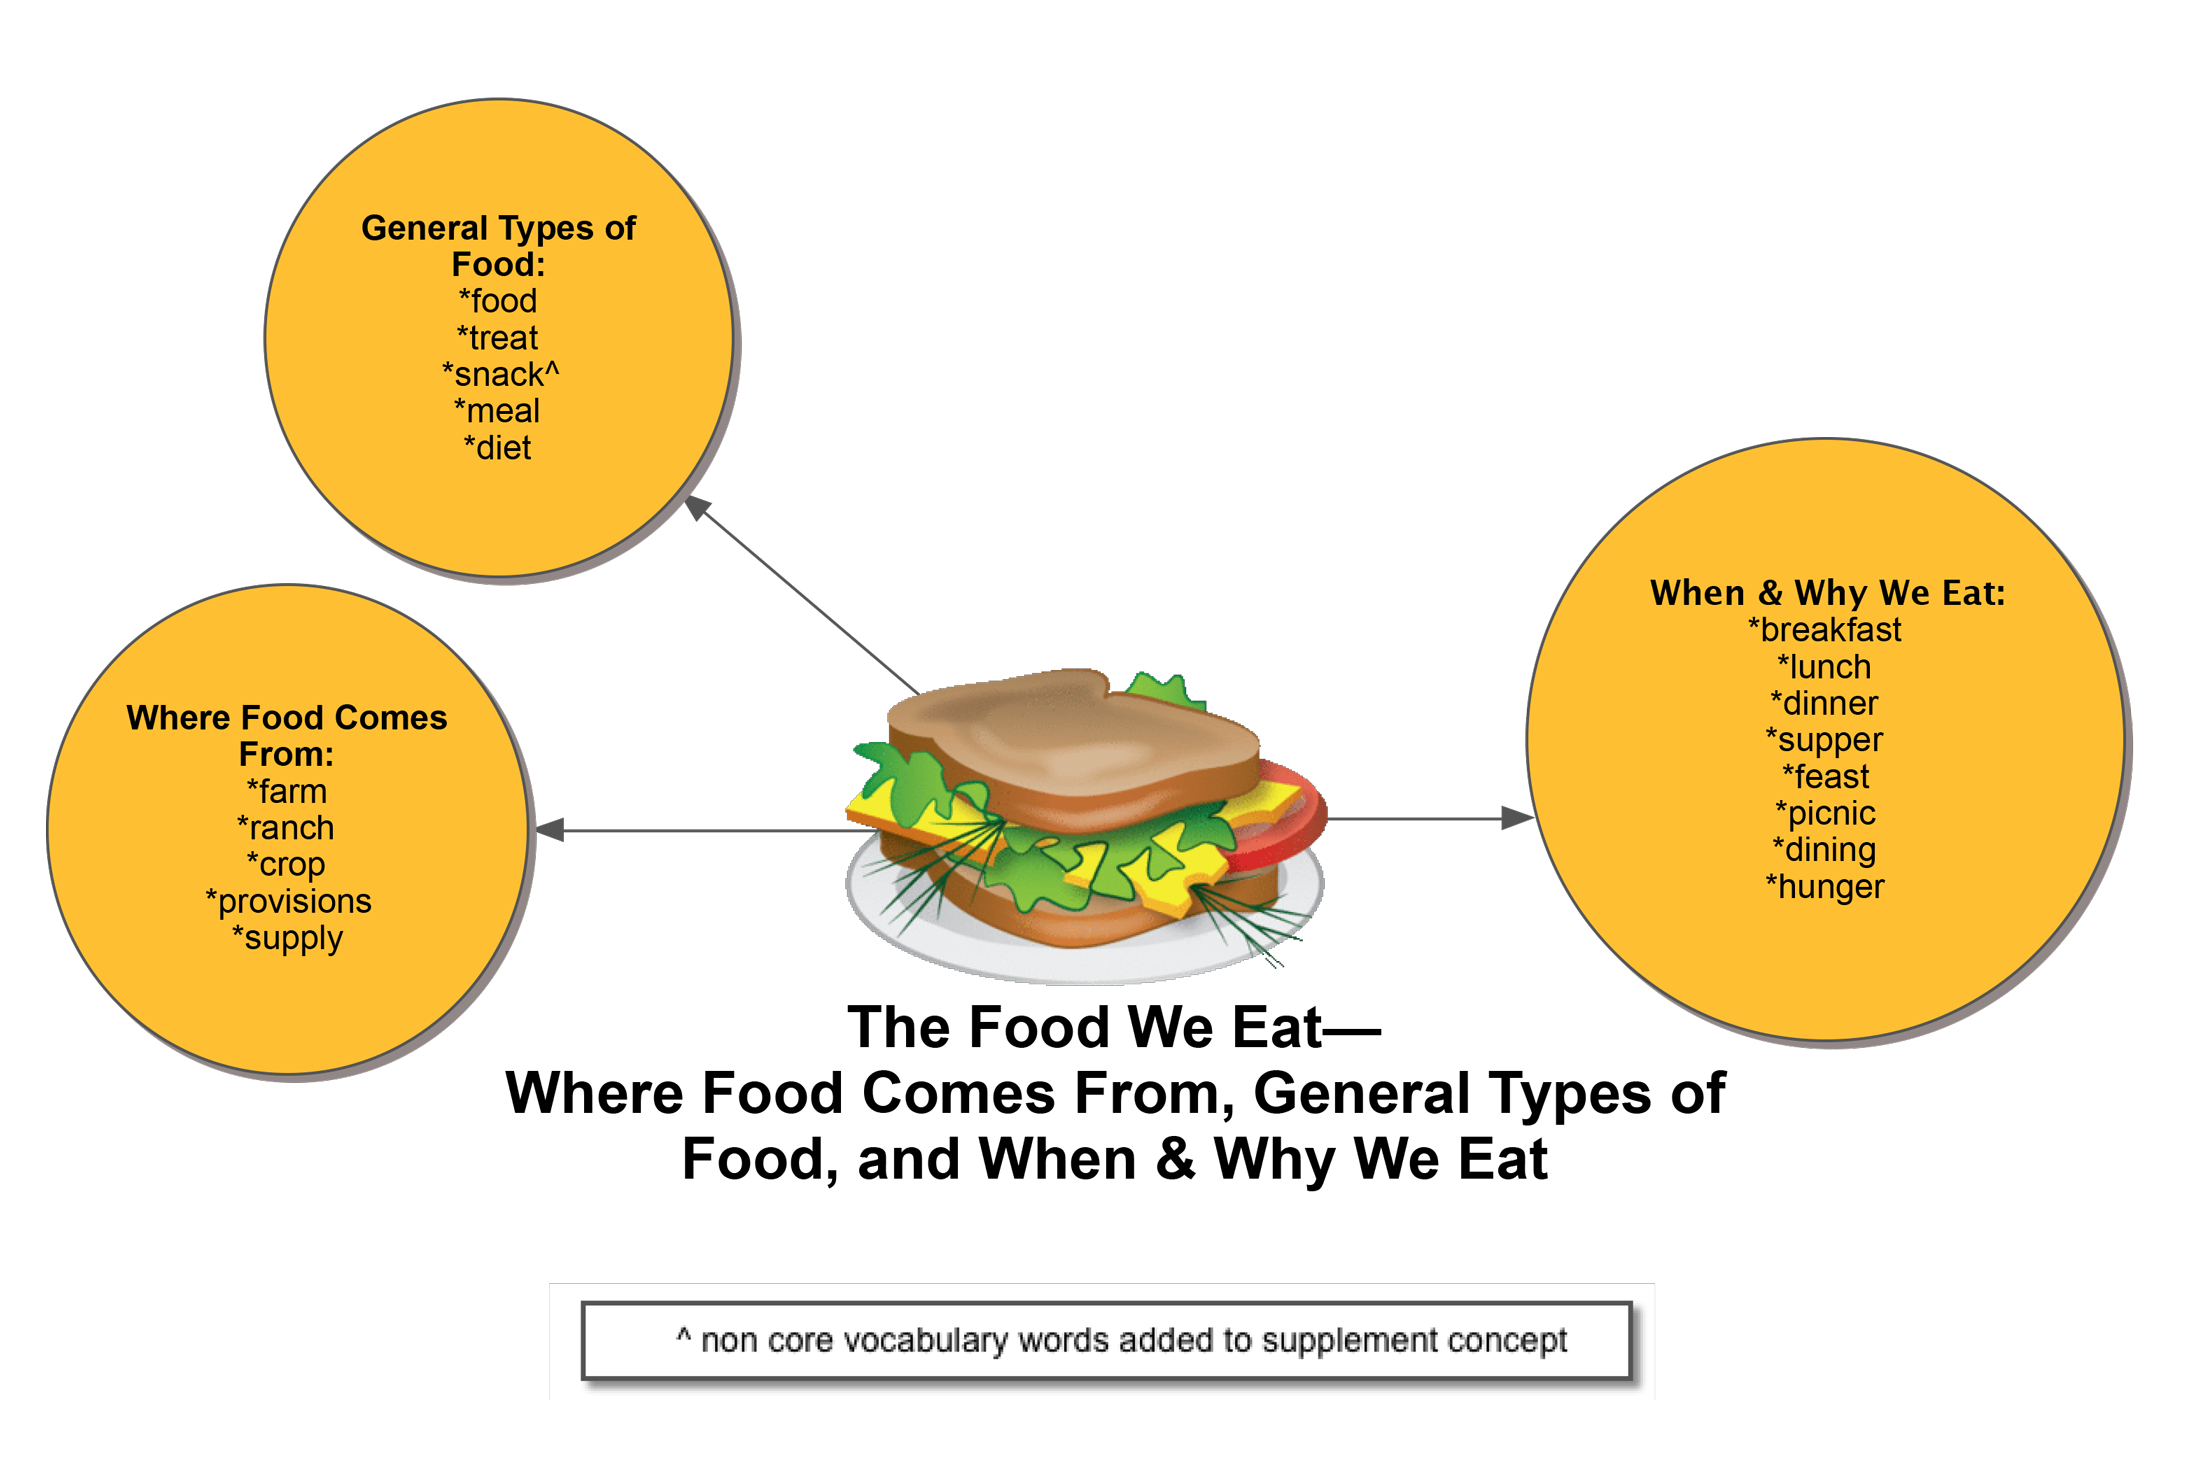 THE-FOOD-WE-EAT-Where-Food-Comes-From-General-Types-of-Food-and-When-and-Why-We-Eat.png